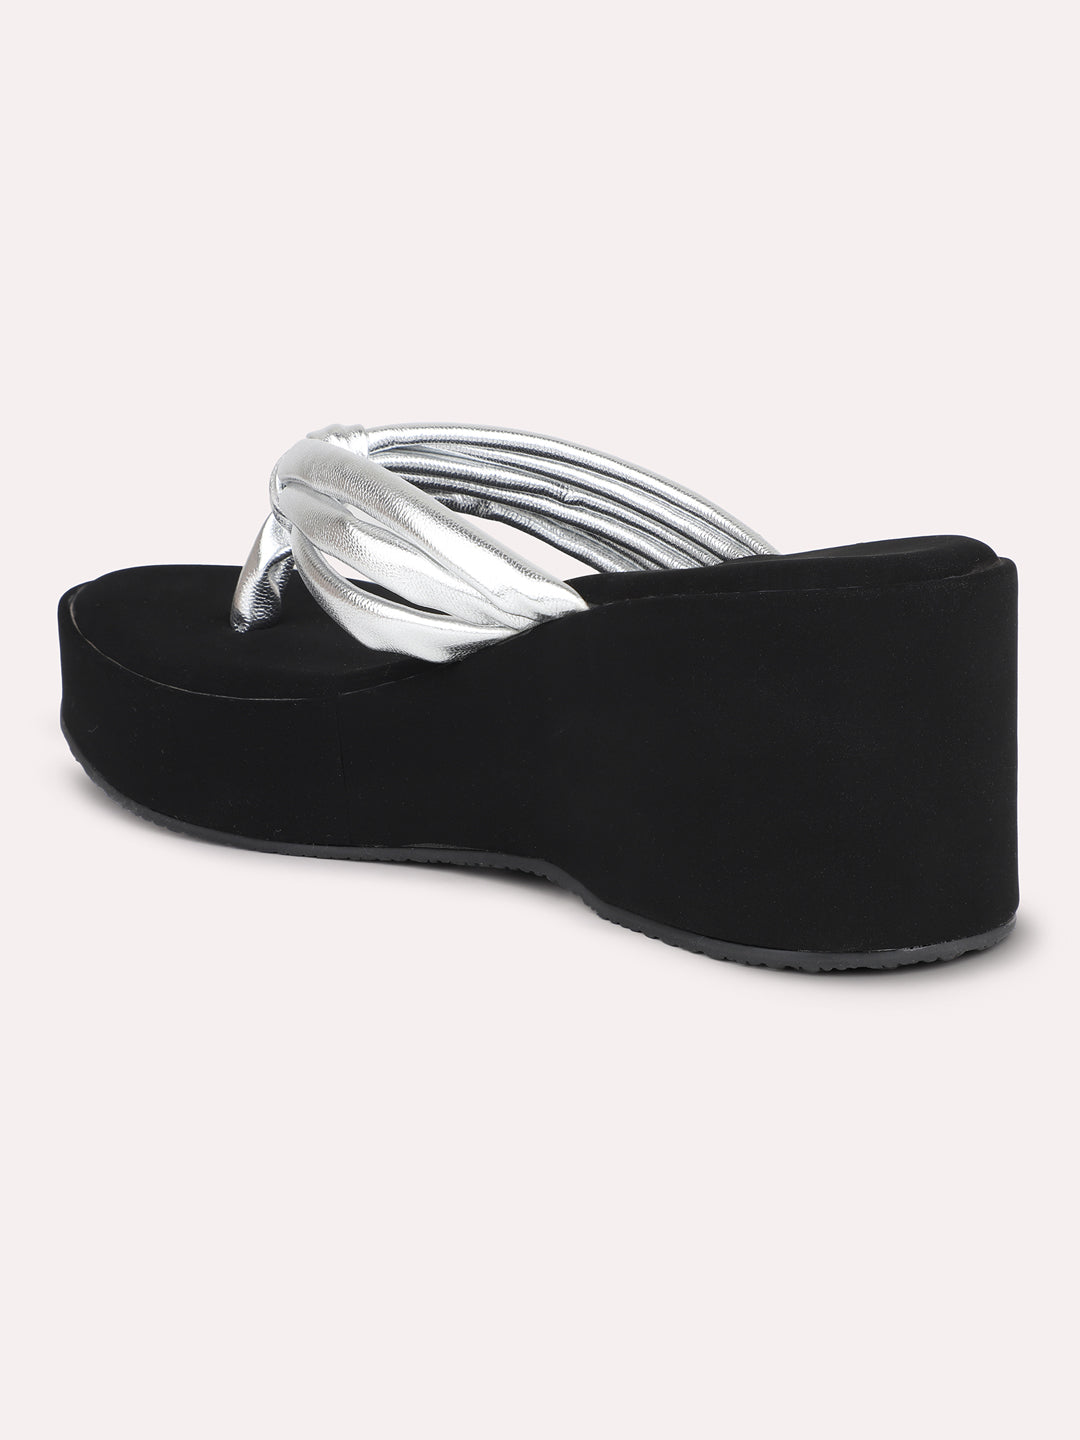 Women Silver Striped Knotted Wedges Heels